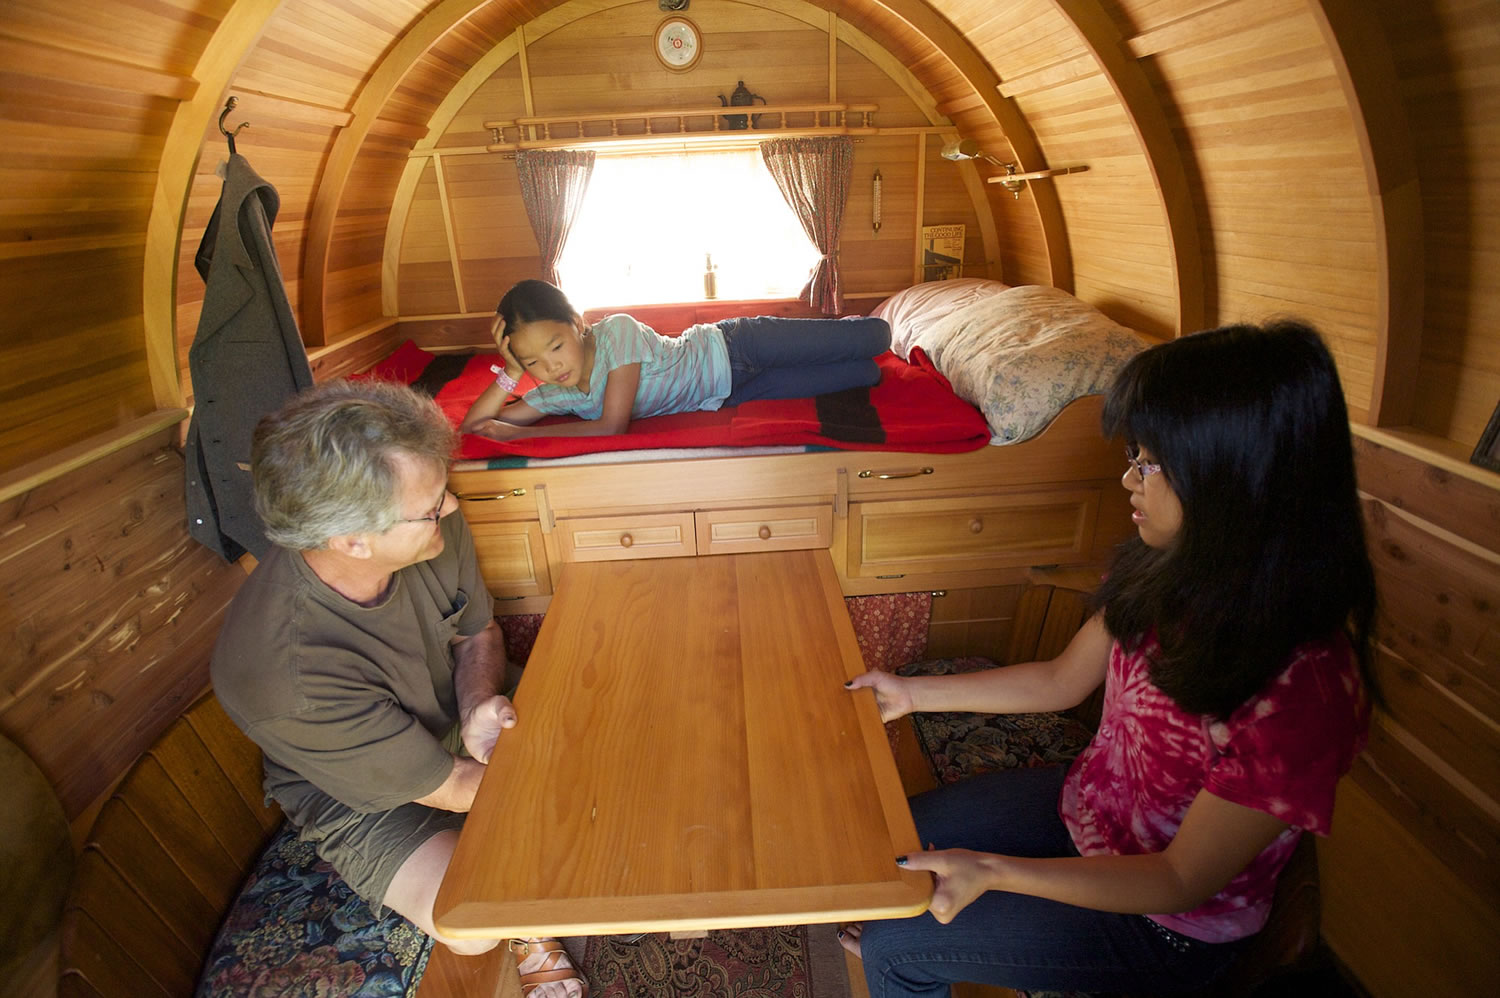 Photos by Steven Lane/The Columbian
Mick Robins sits at the pull-out table of his camper with his daughter, Pei, 15, while daughter Sadie, 11, rests on the bed.